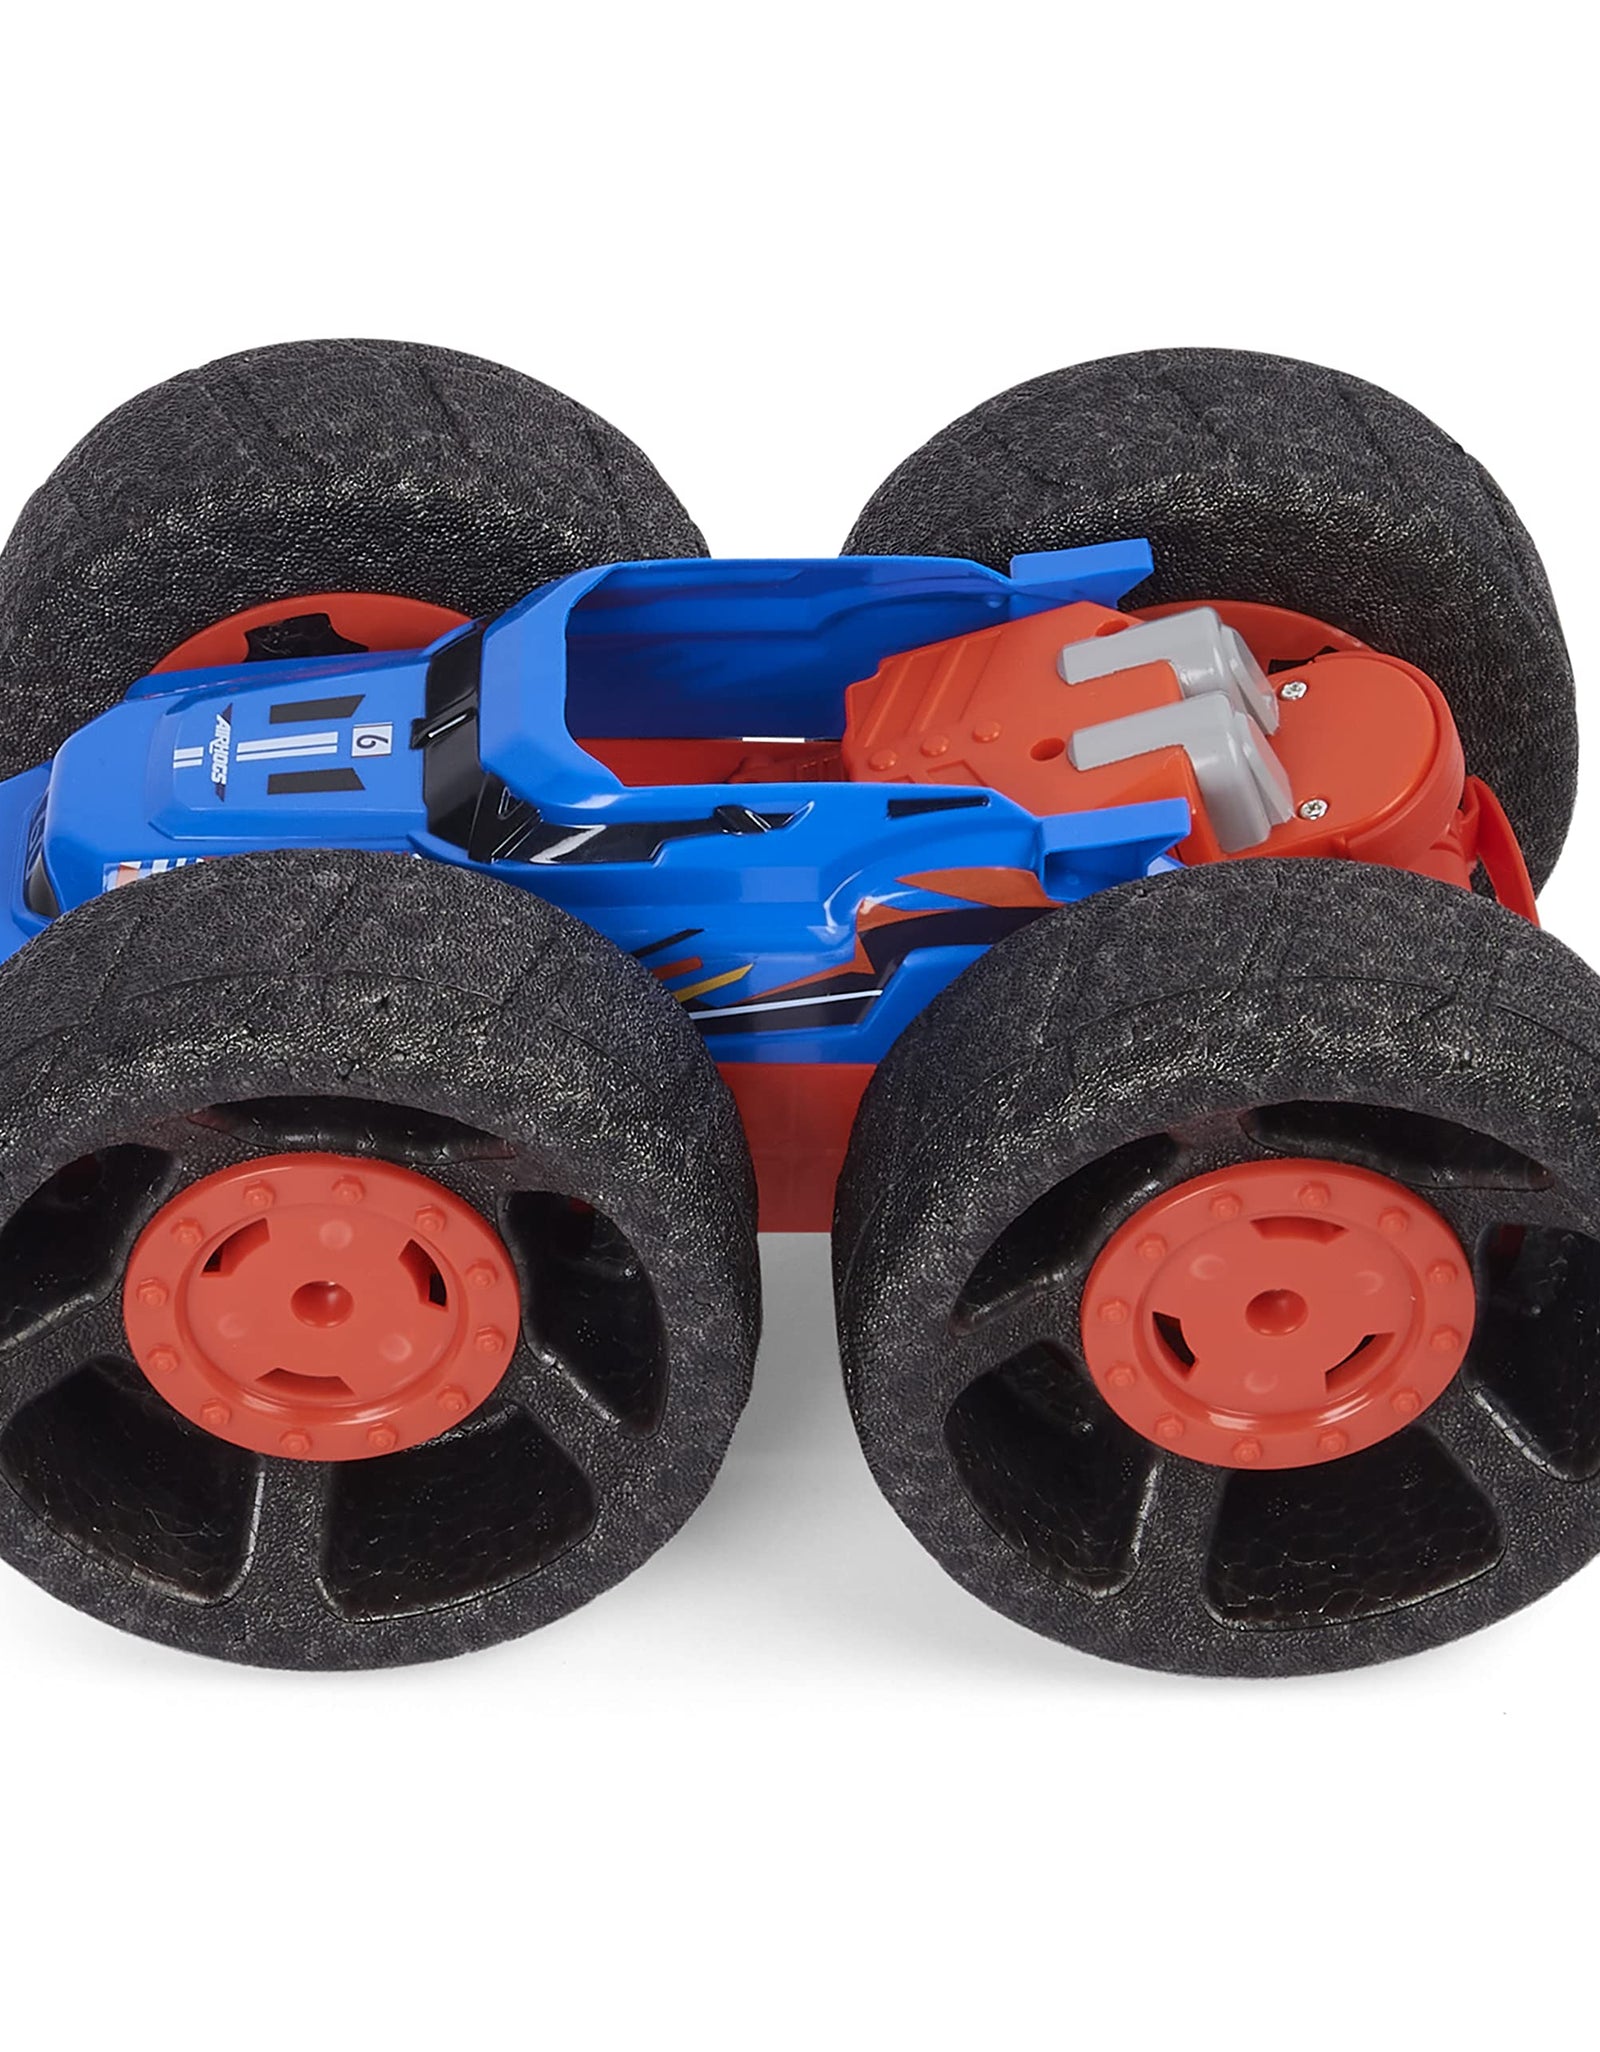 Air Hogs Super Soft, Jump Fury with Zero-Damage Wheels, Extreme Jumping Remote Control Car, Kids Toys for Kids 4 and up, 1:15 Scale